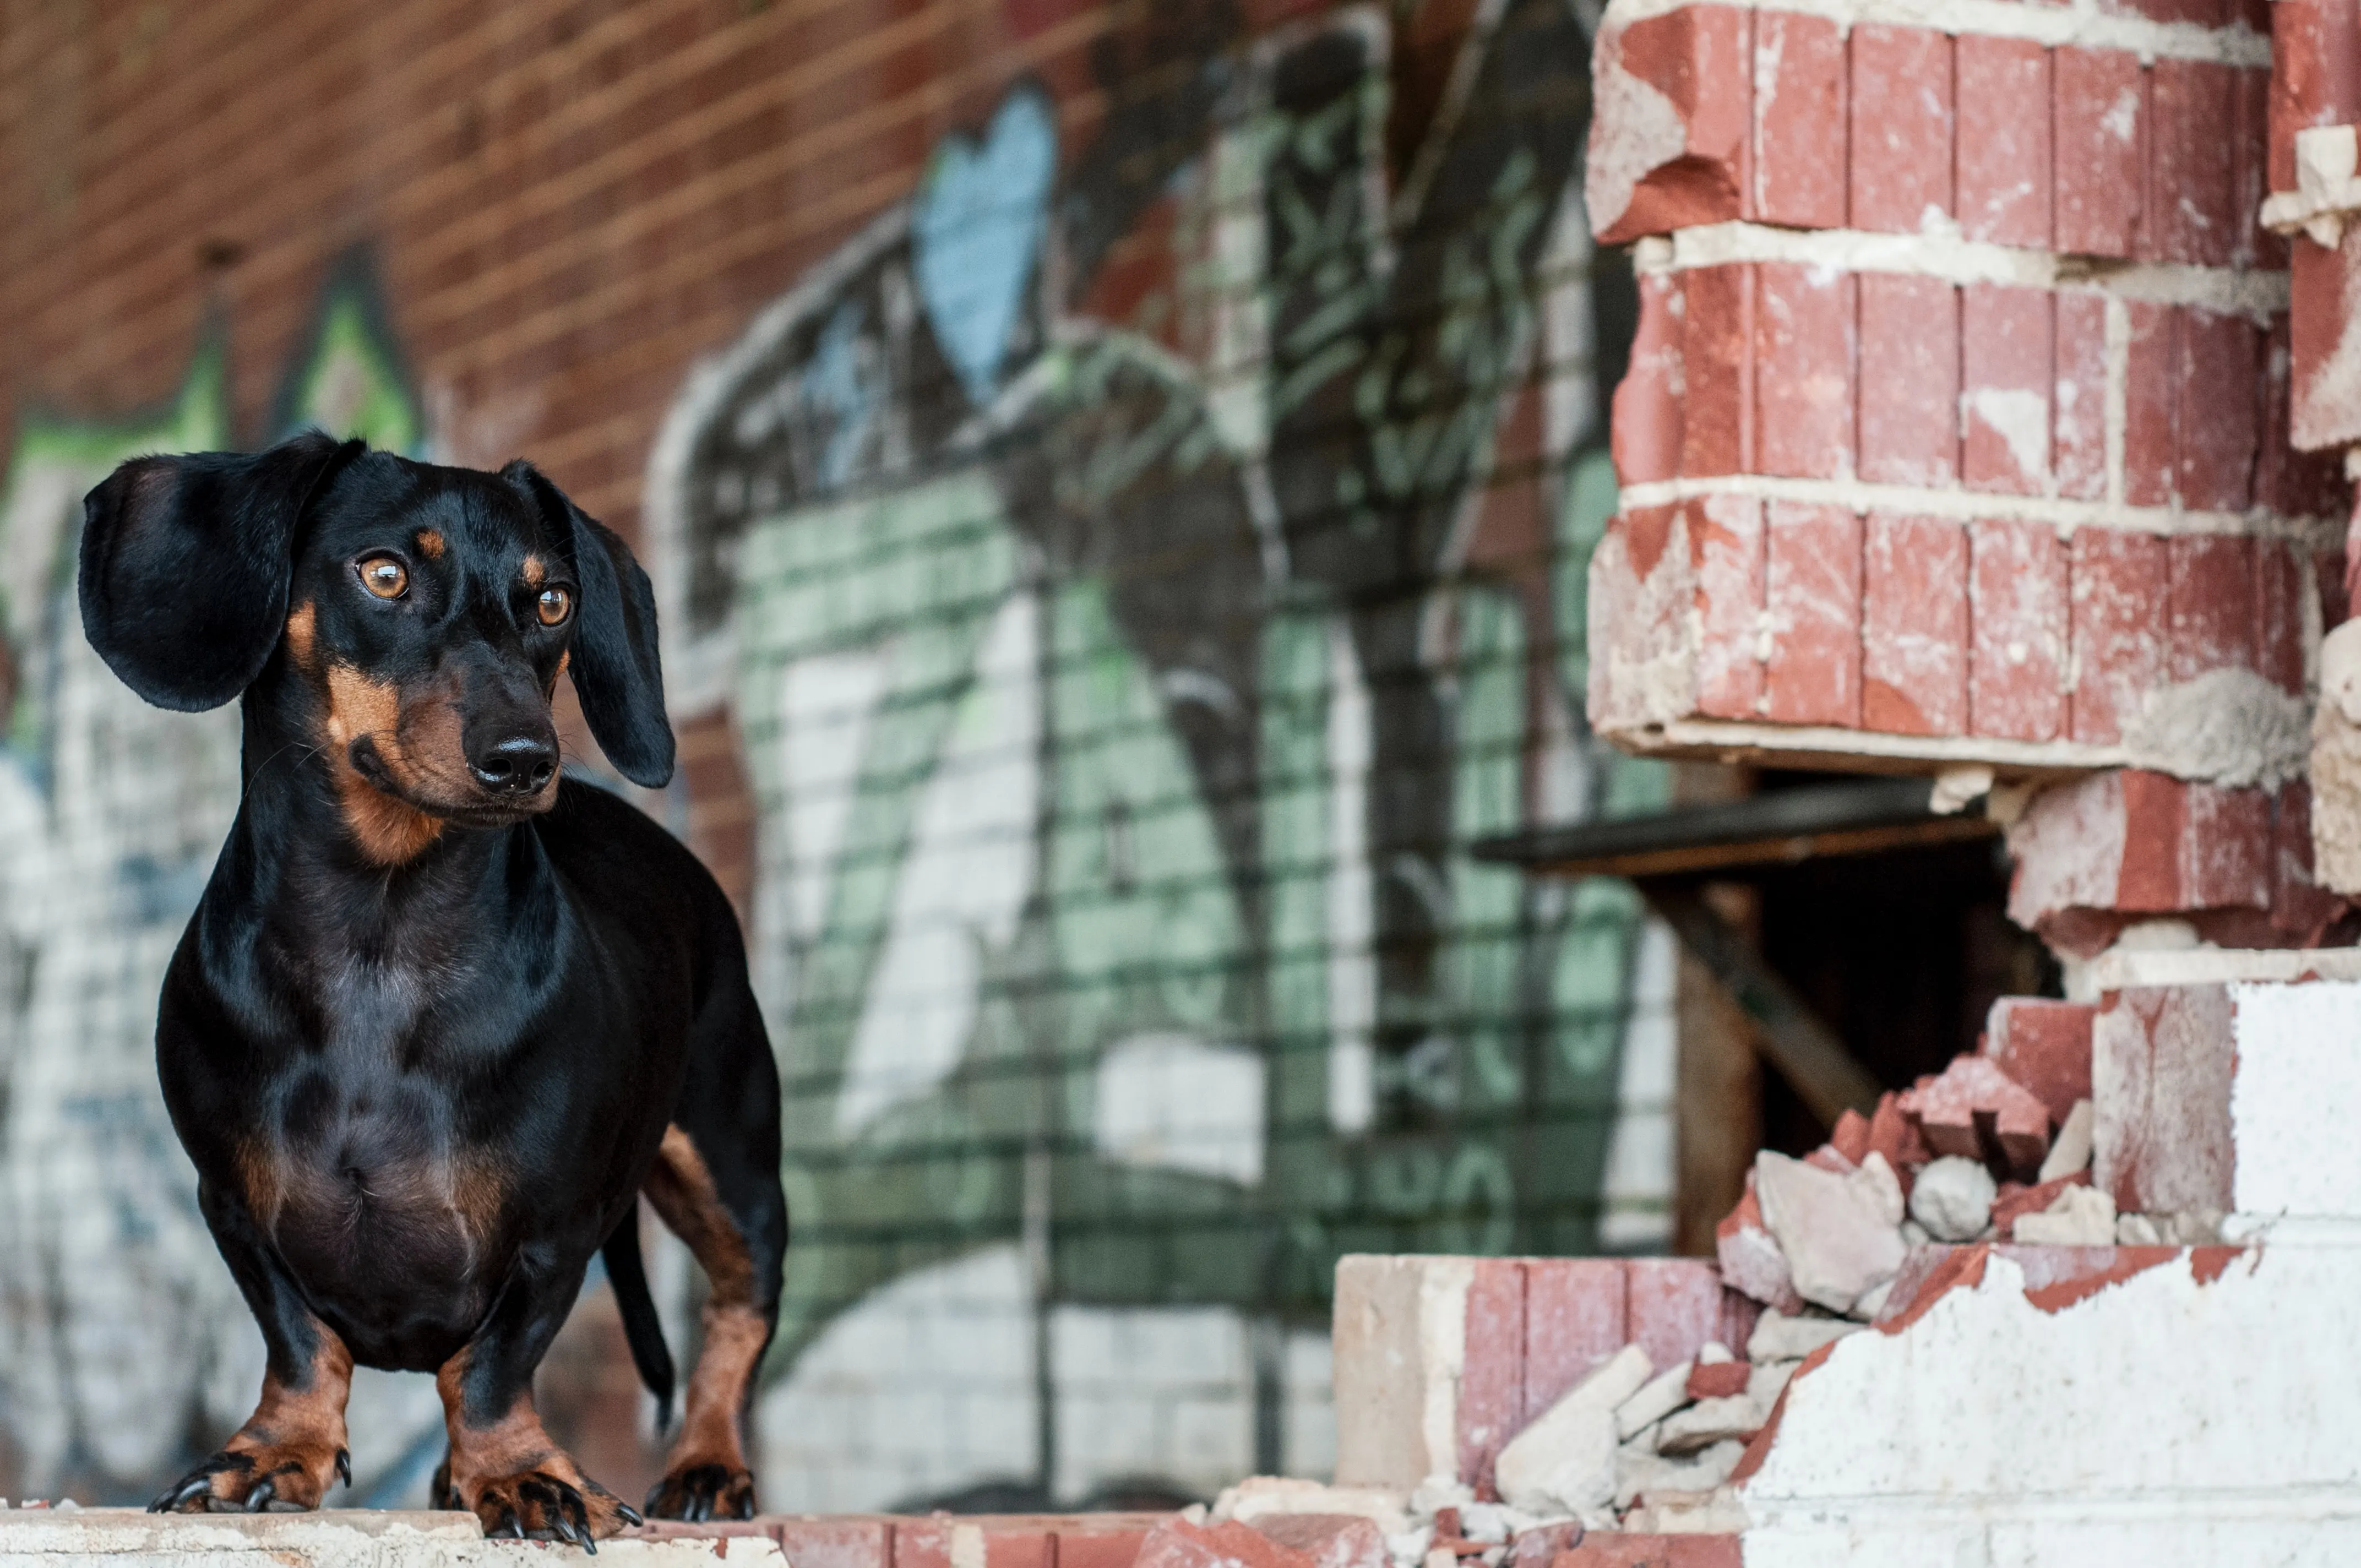 Dachshunds Cover Photo from Unsplash